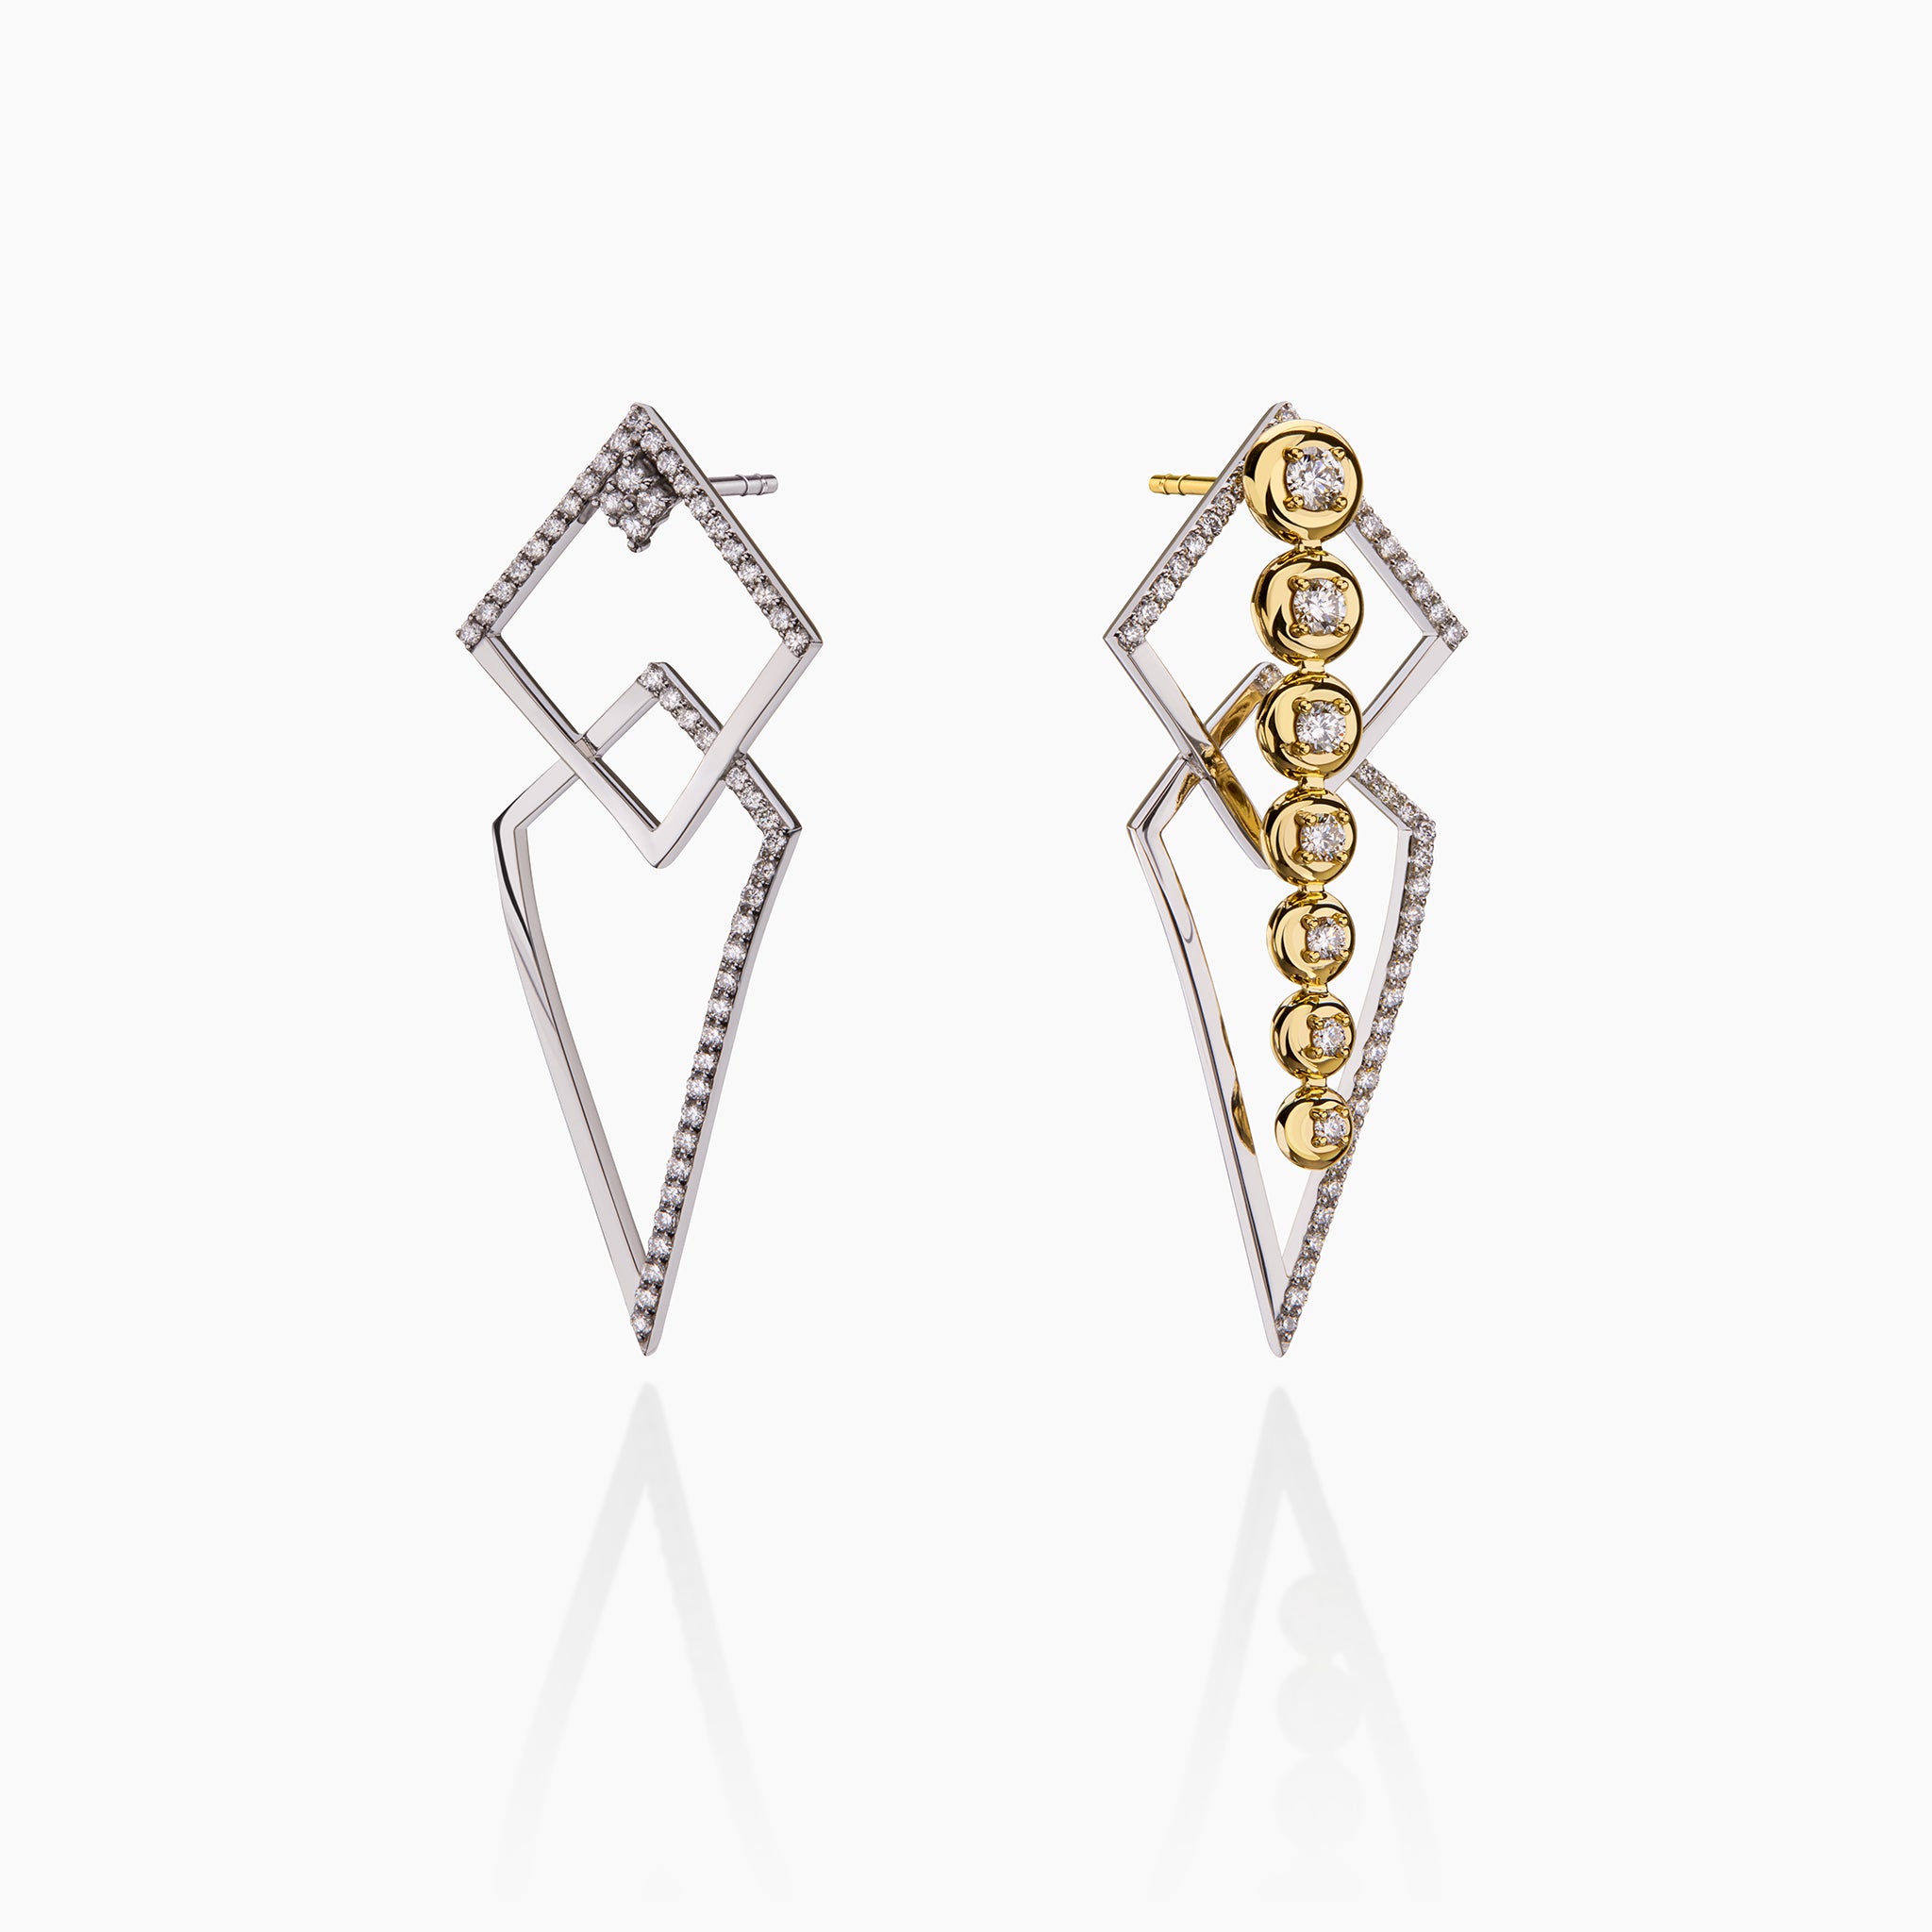 Thunder and Star Trail earrings displayed against an off-white background.